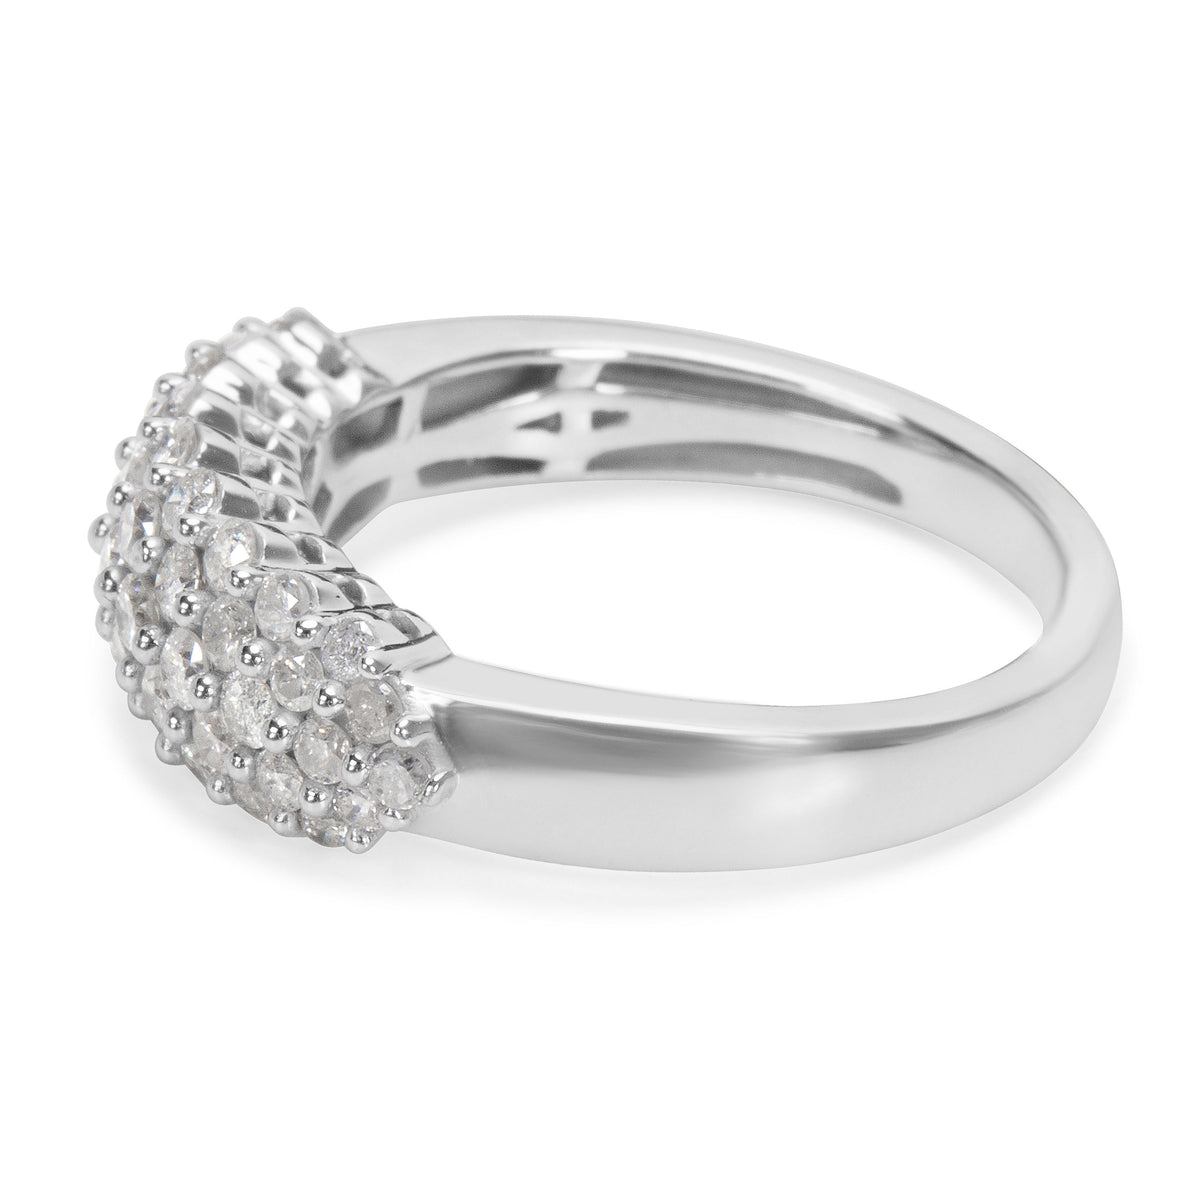 Cluster Diamond Band in 10KT White Gold 1.00 ctw